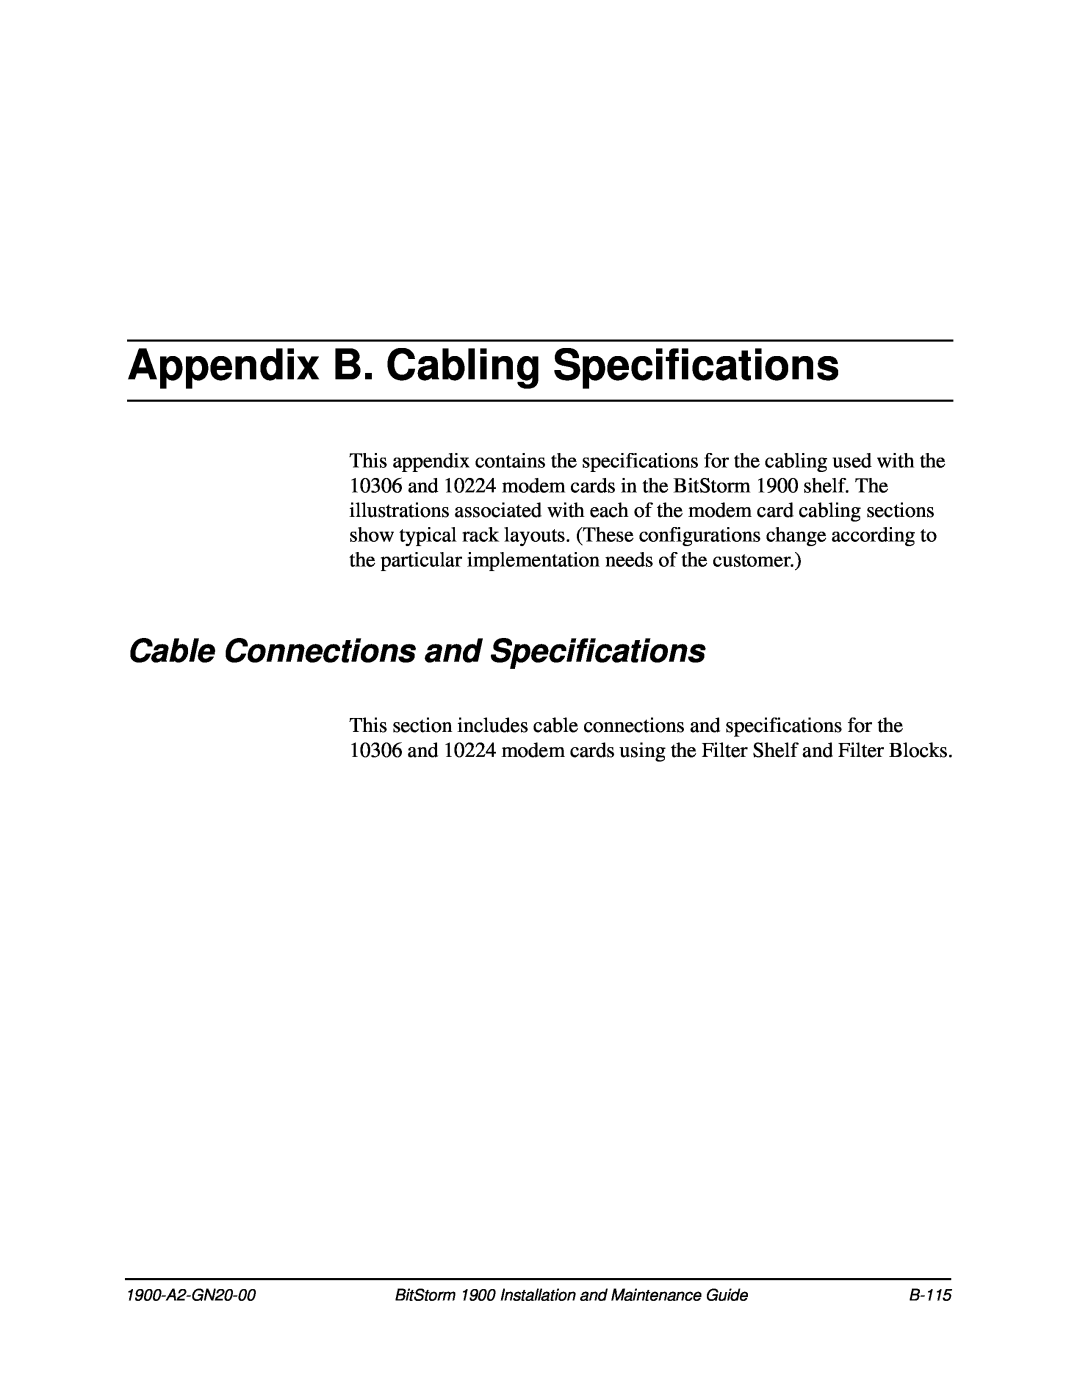 Paradyne 1900 manual Appendix B. Cabling Specifications, Cable Connections and Specifications 